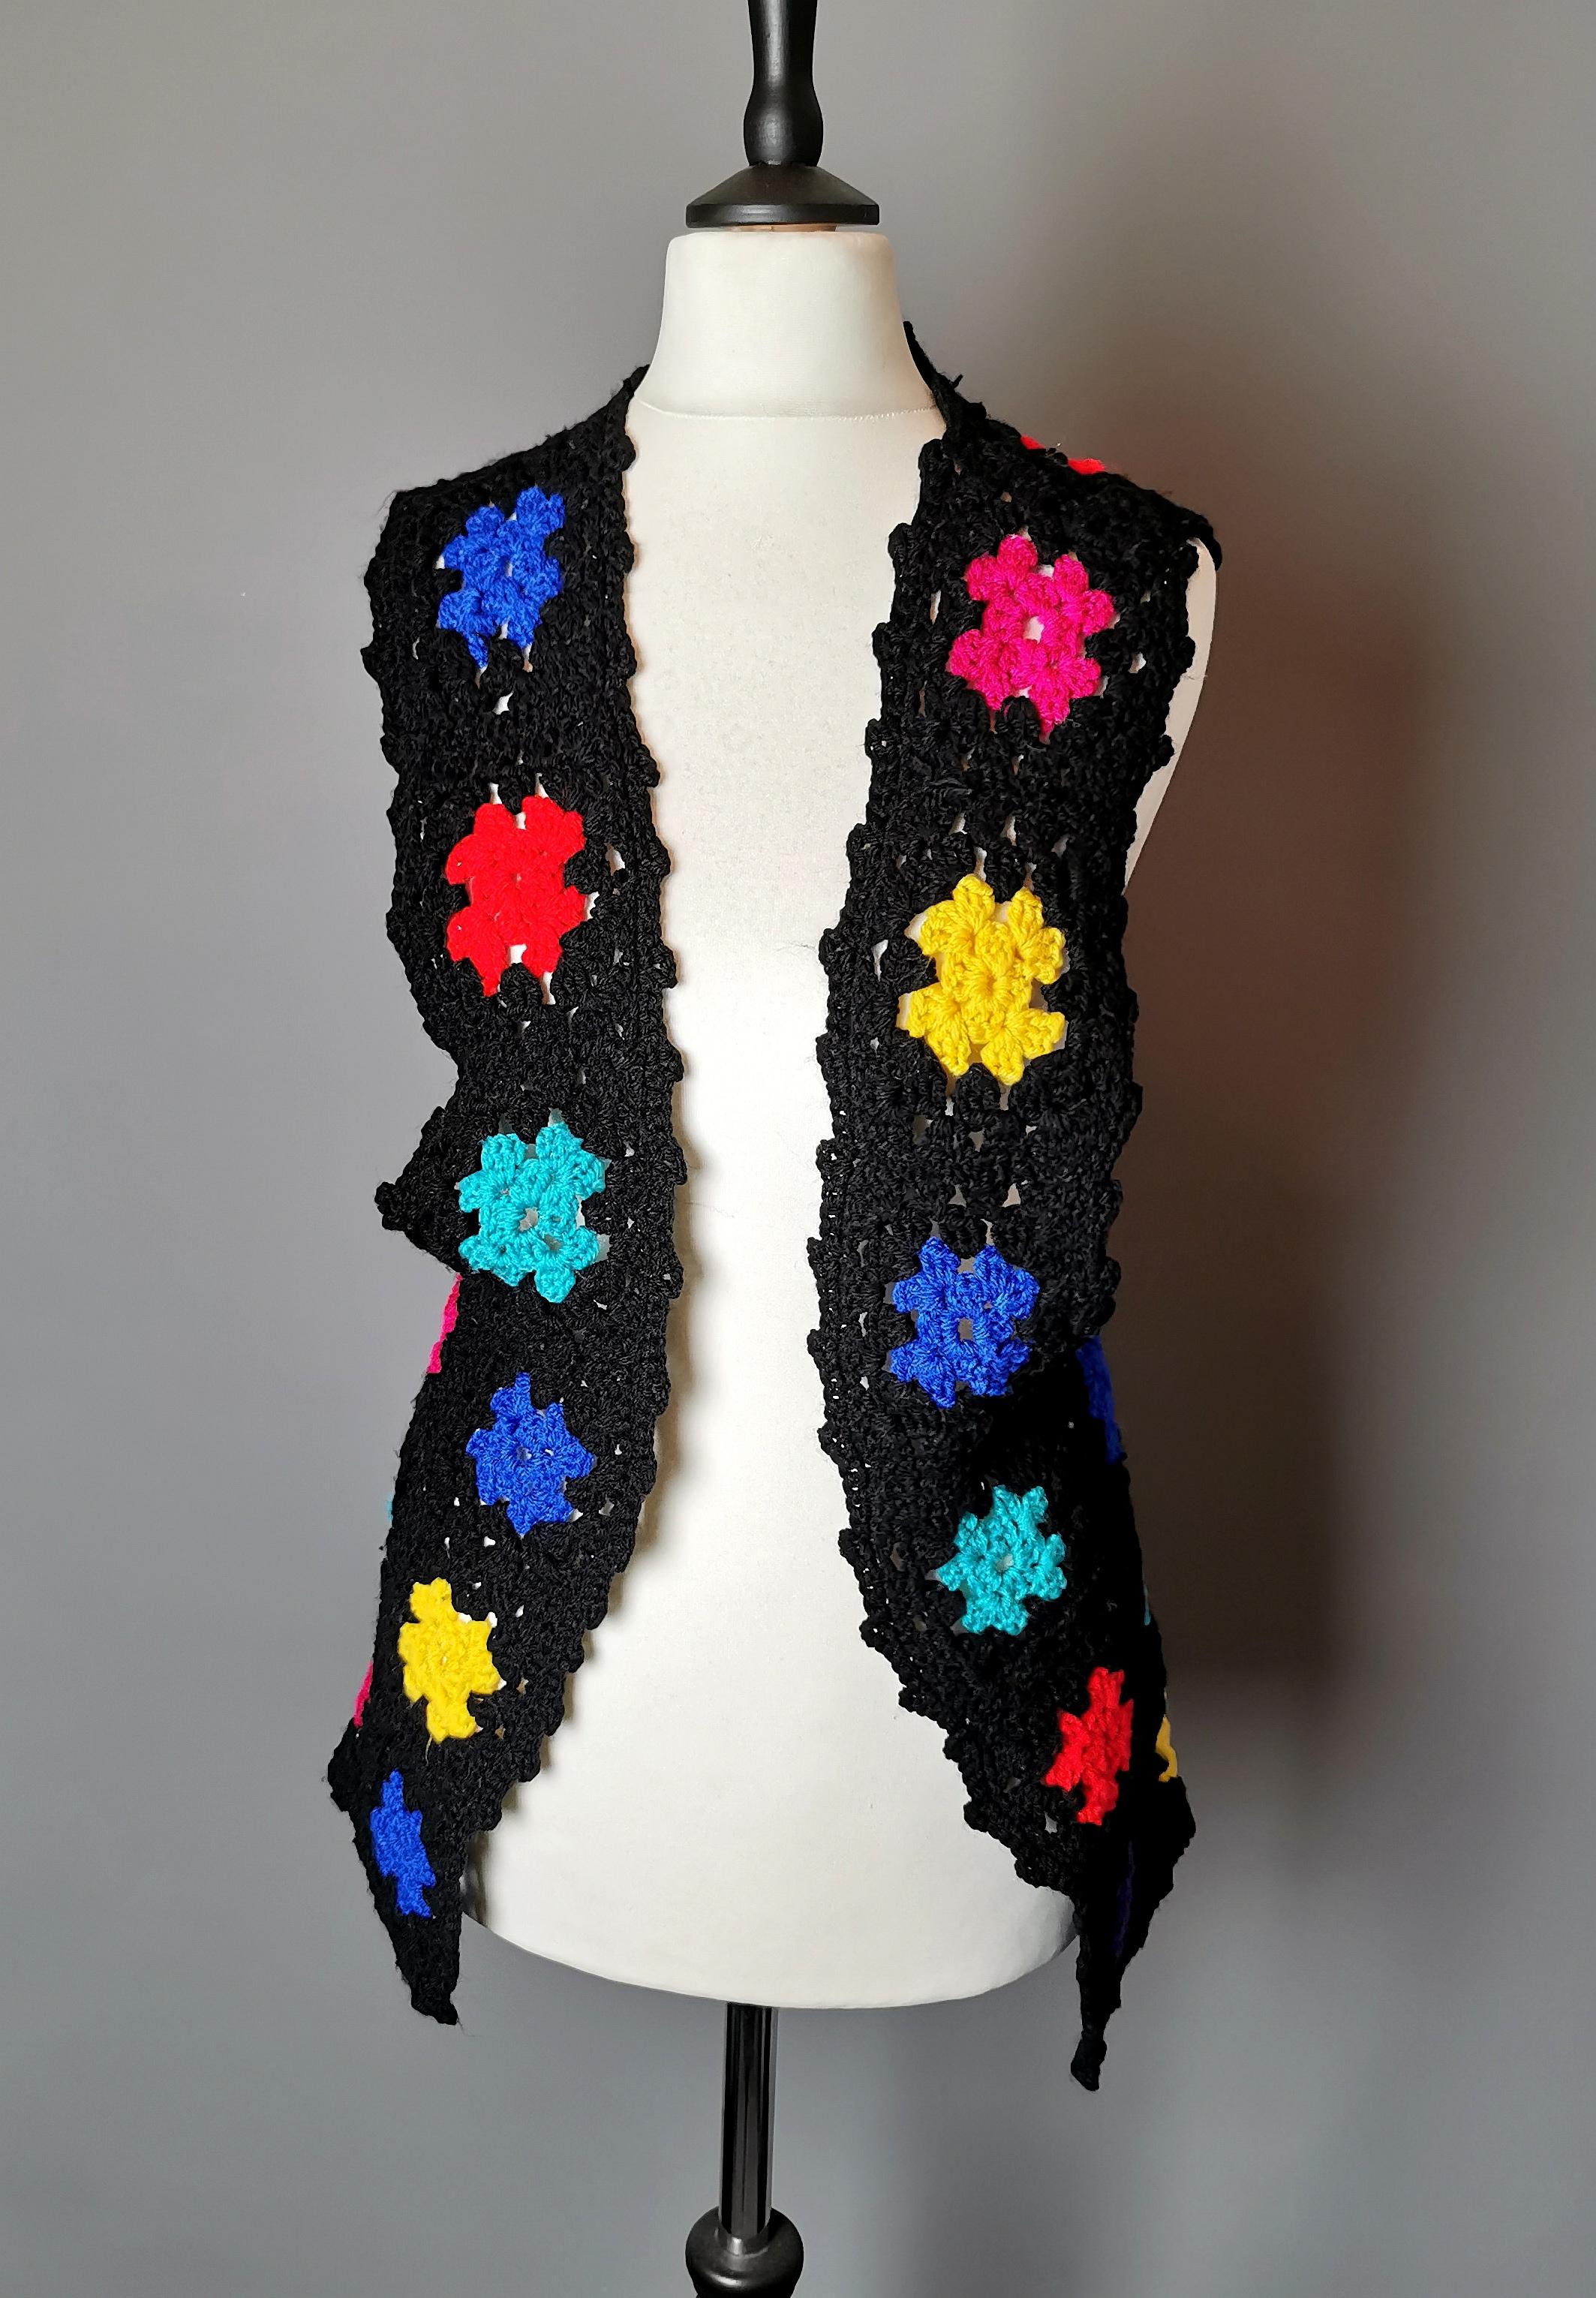 A rare vintage 1970s funky and colourful hand crocheted vest or waistcoat.

It is becoming increasingly tough to source original knitwear and these pieces are always in high demand, often hand made such as this piece, making the design truly one of